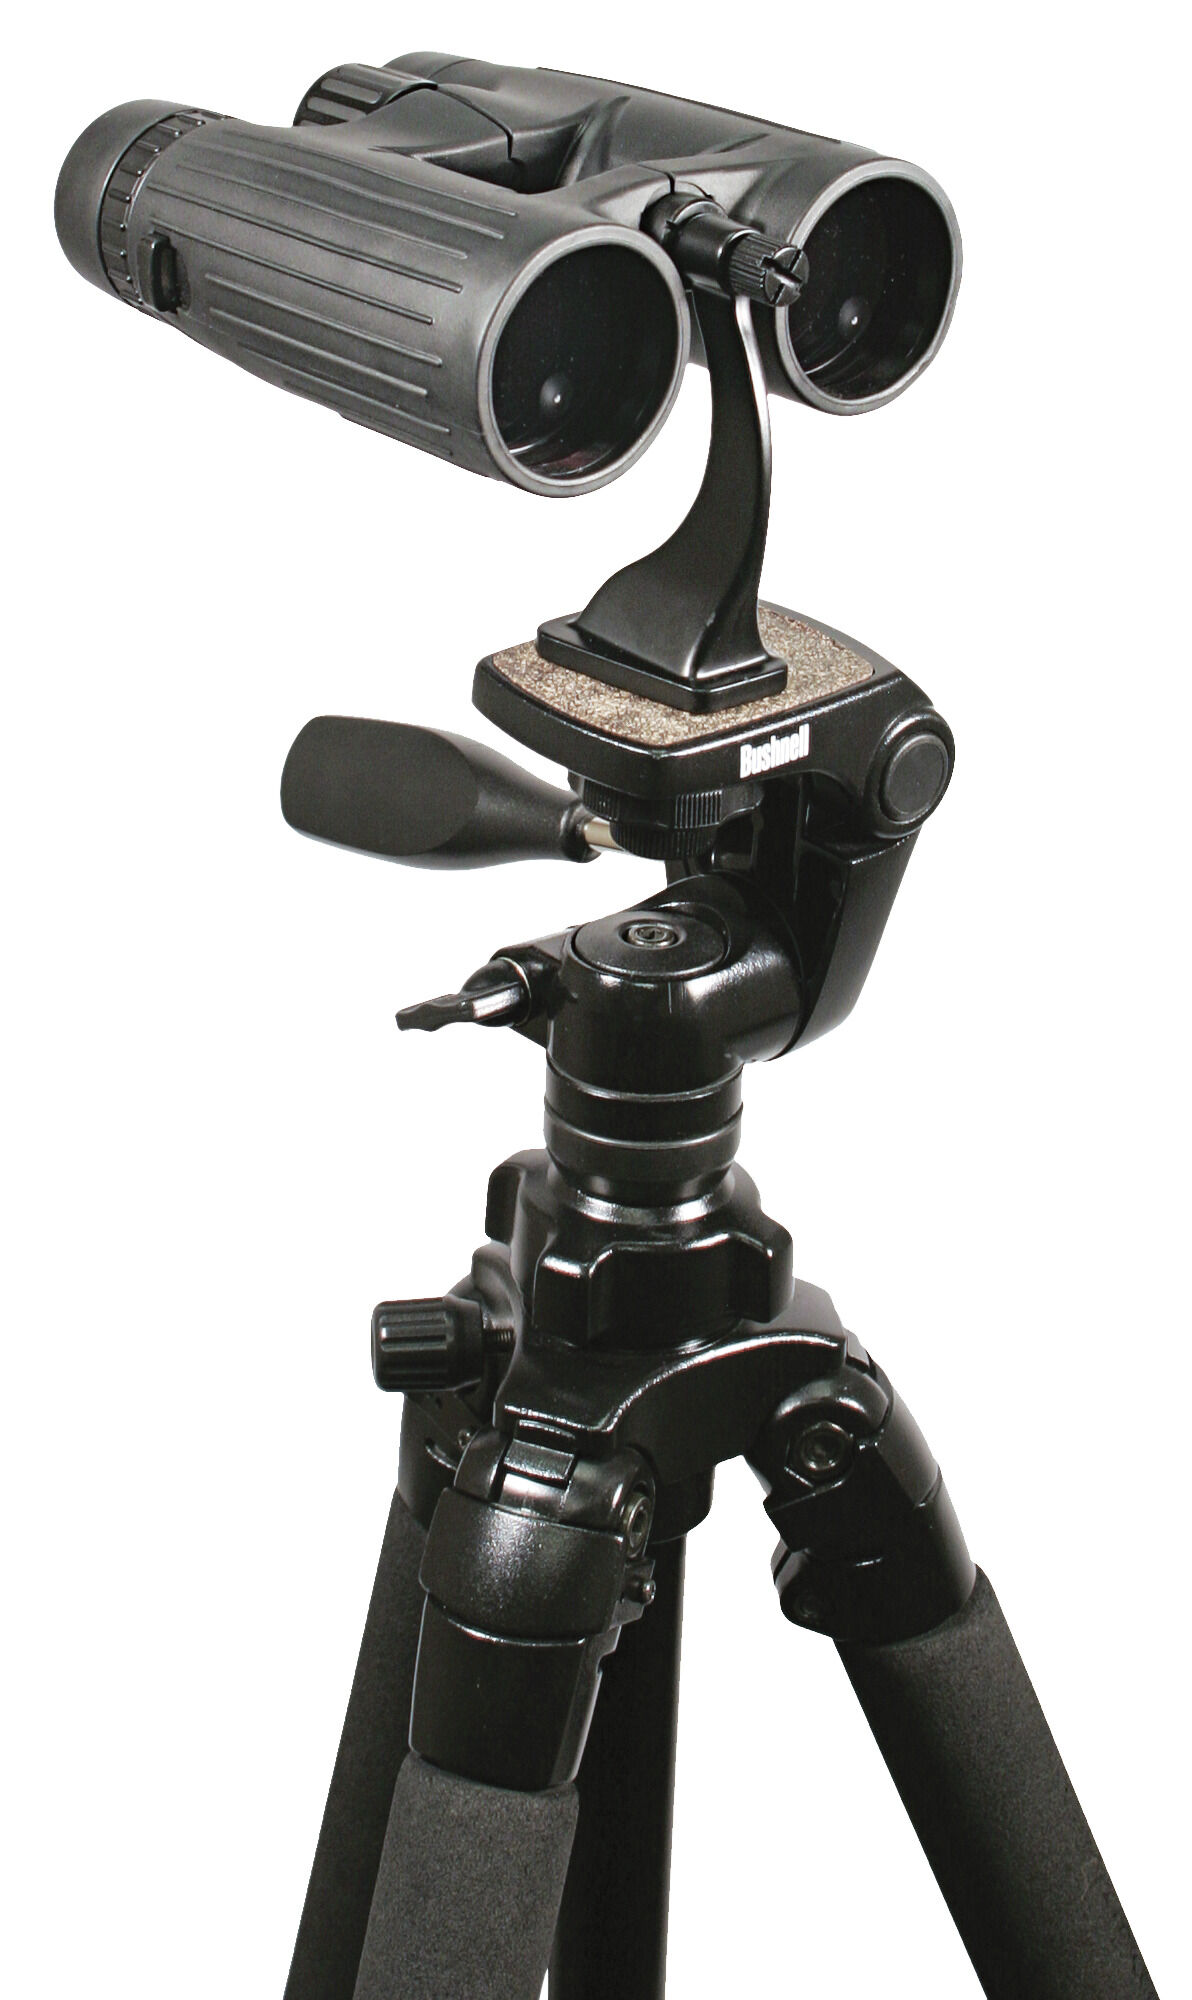 Tripod for Binoculars with Mount Adapter Portable Compact Tripod Folded 